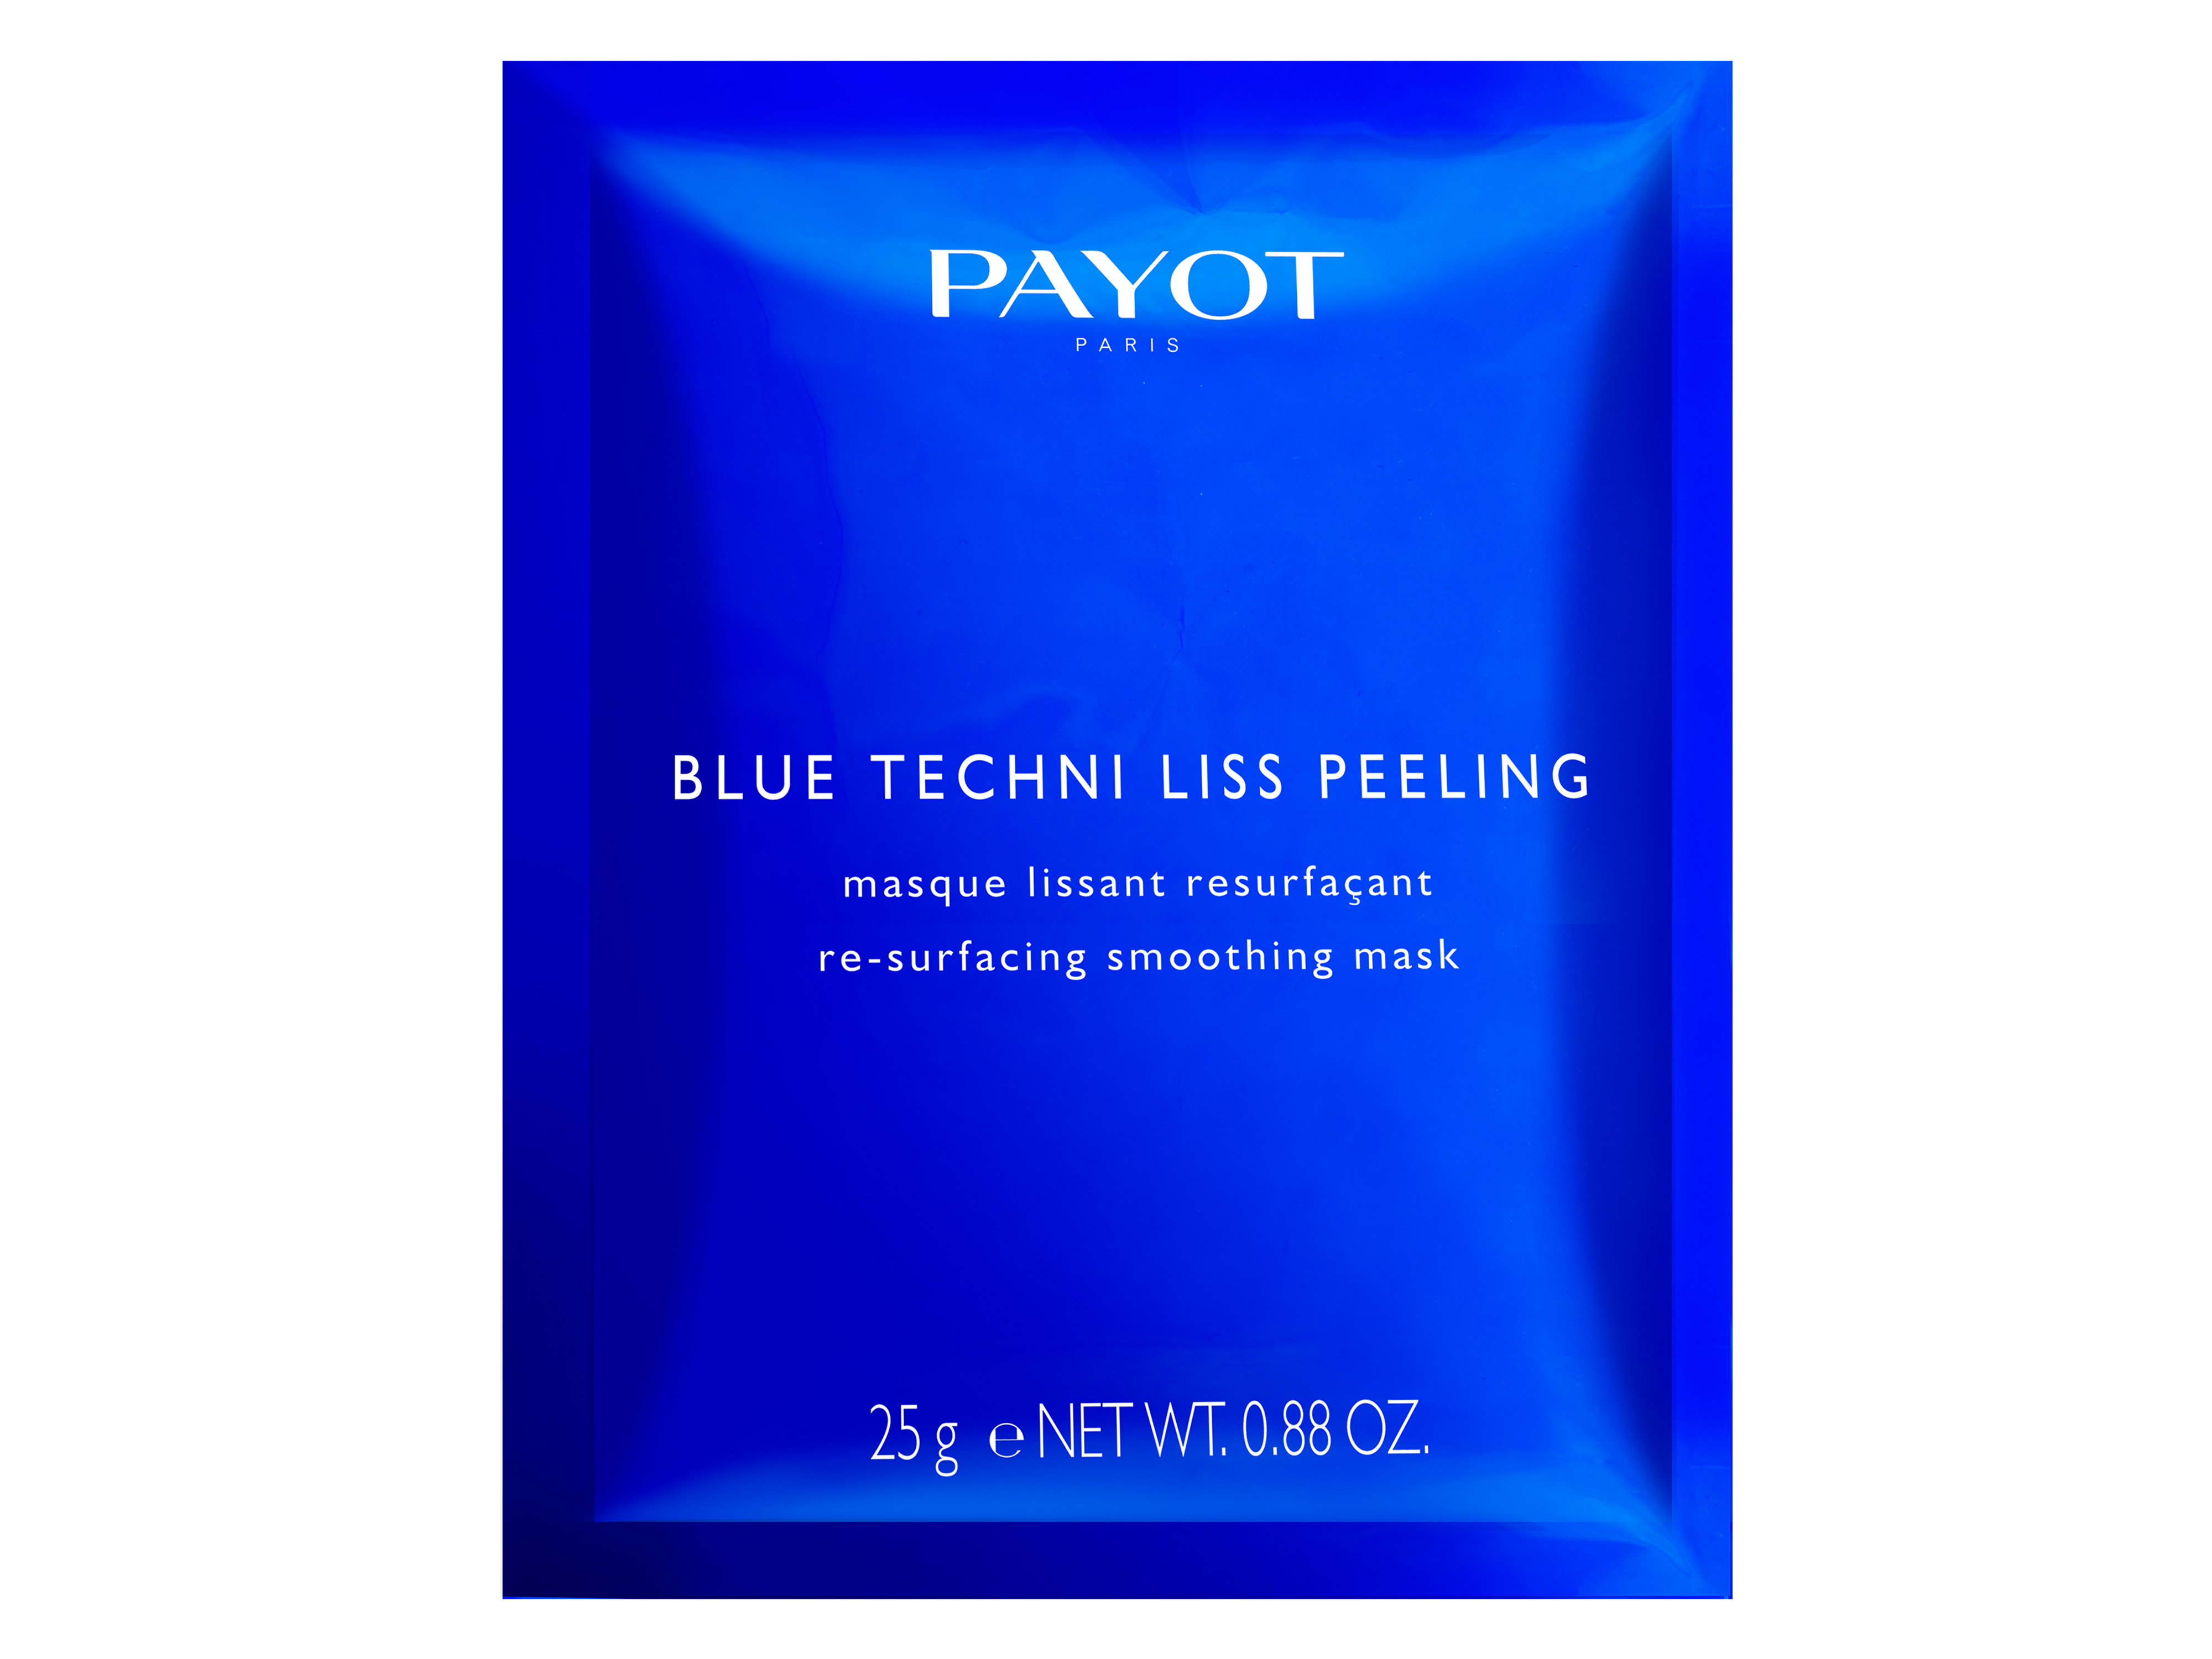 Payot Payot Blue Techni Liss Weekend Peeling, 1 stk.